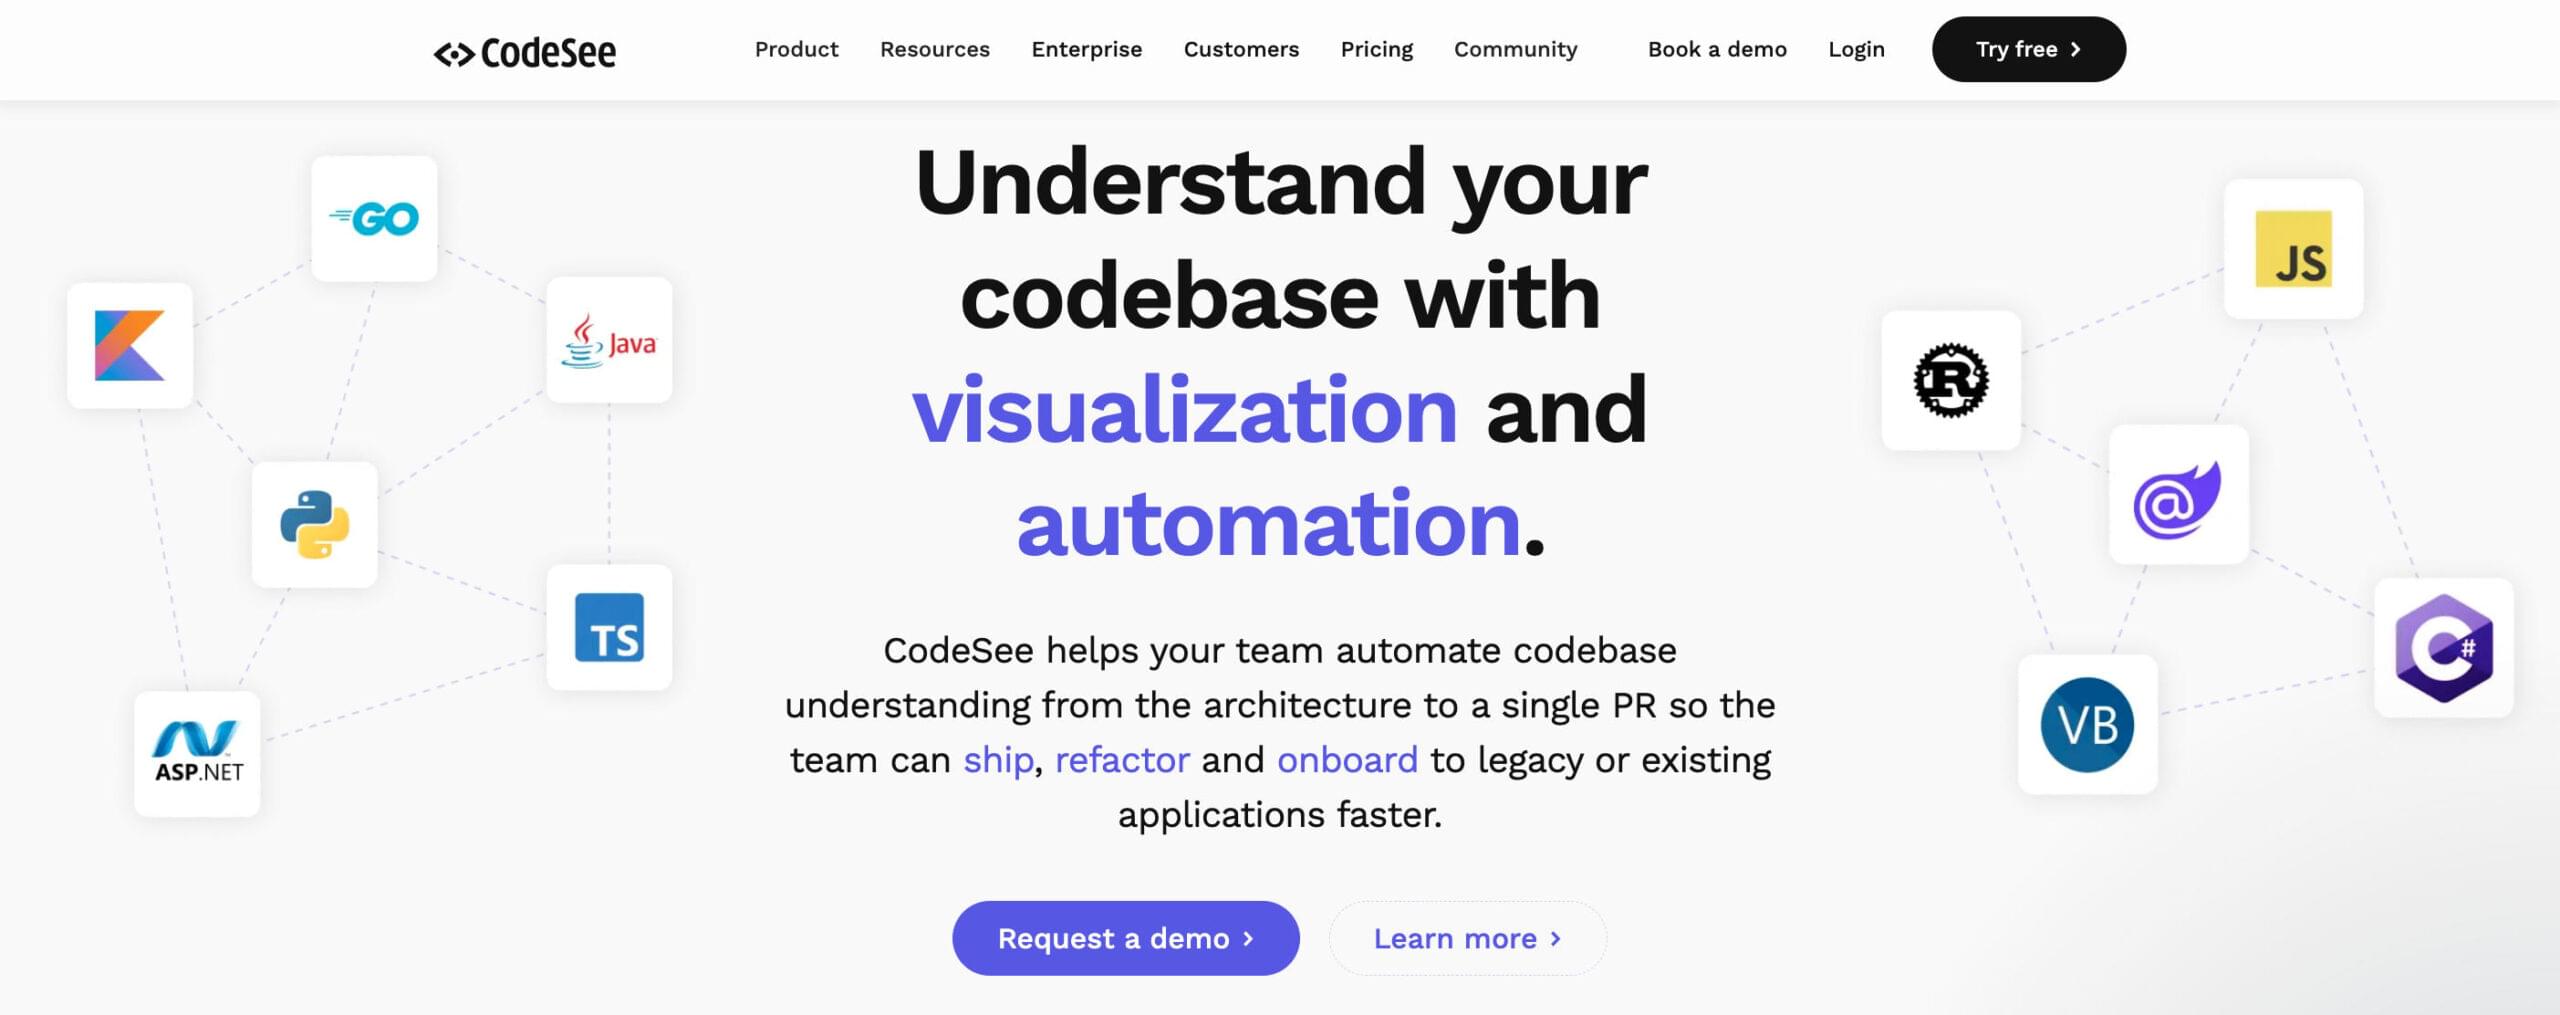 The CodeSee home page